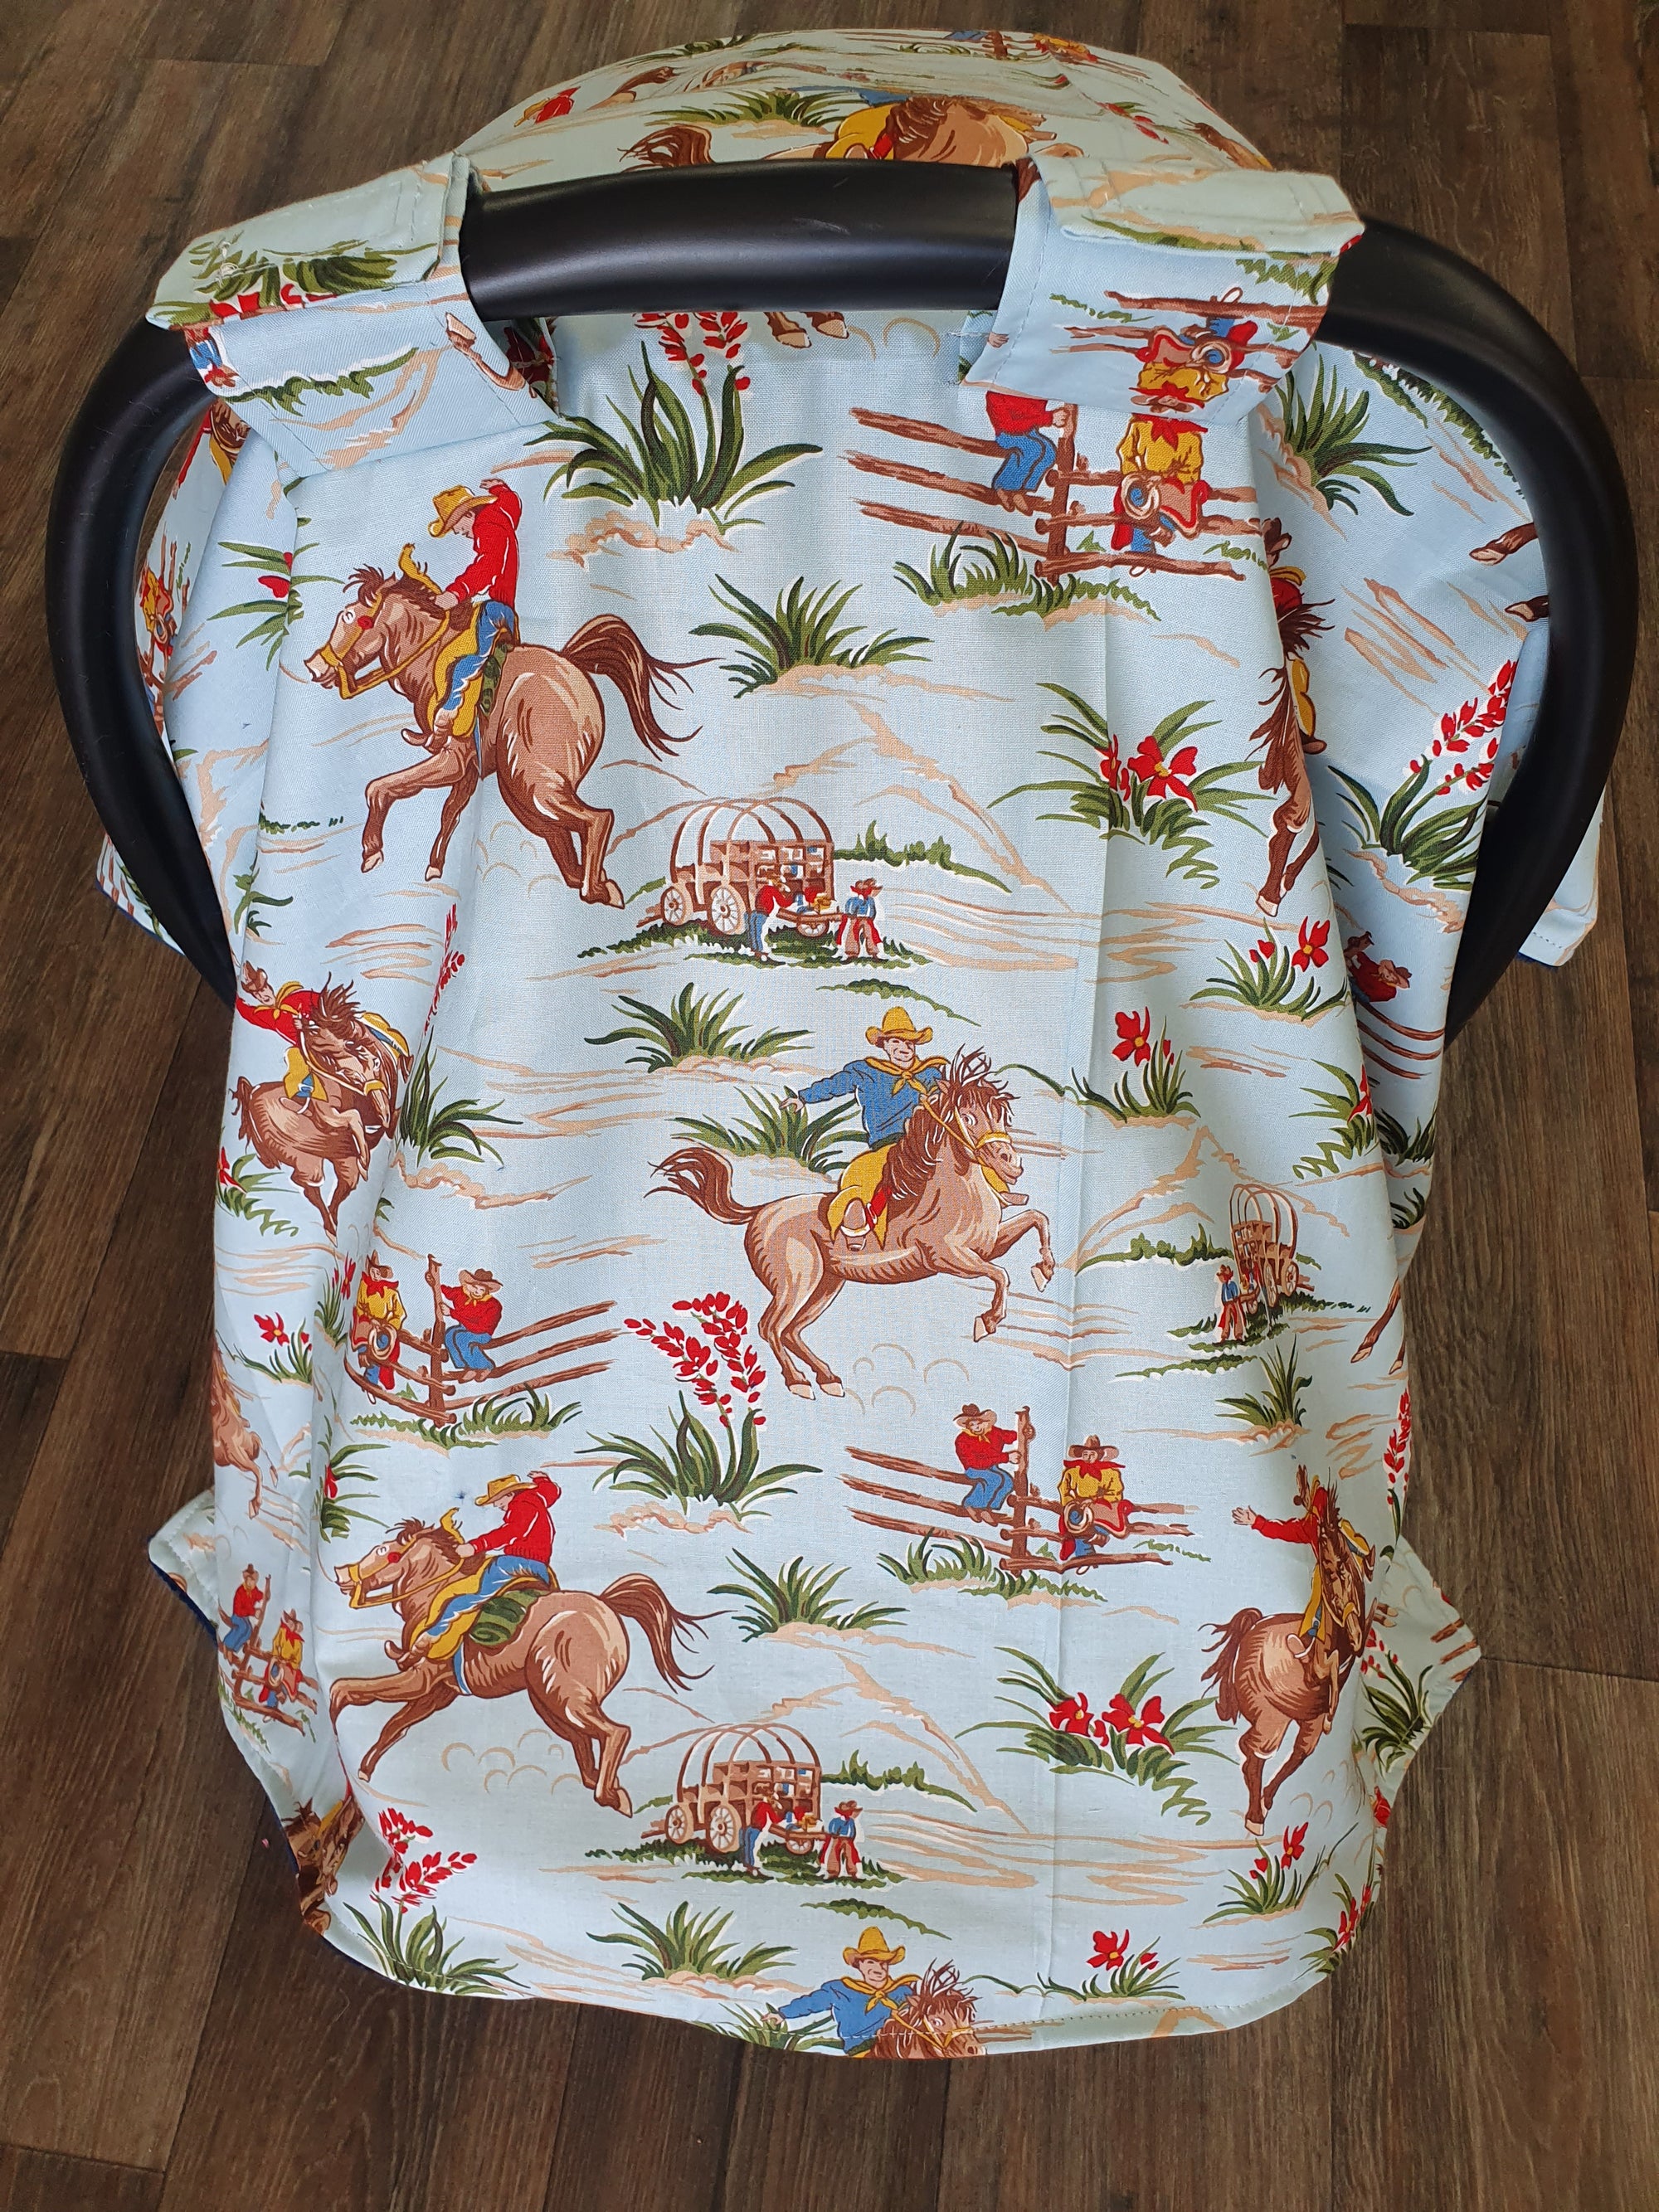 Carseat Tent - Barn Dandy Carseat Canopy, Western - DBC Baby Bedding Co 